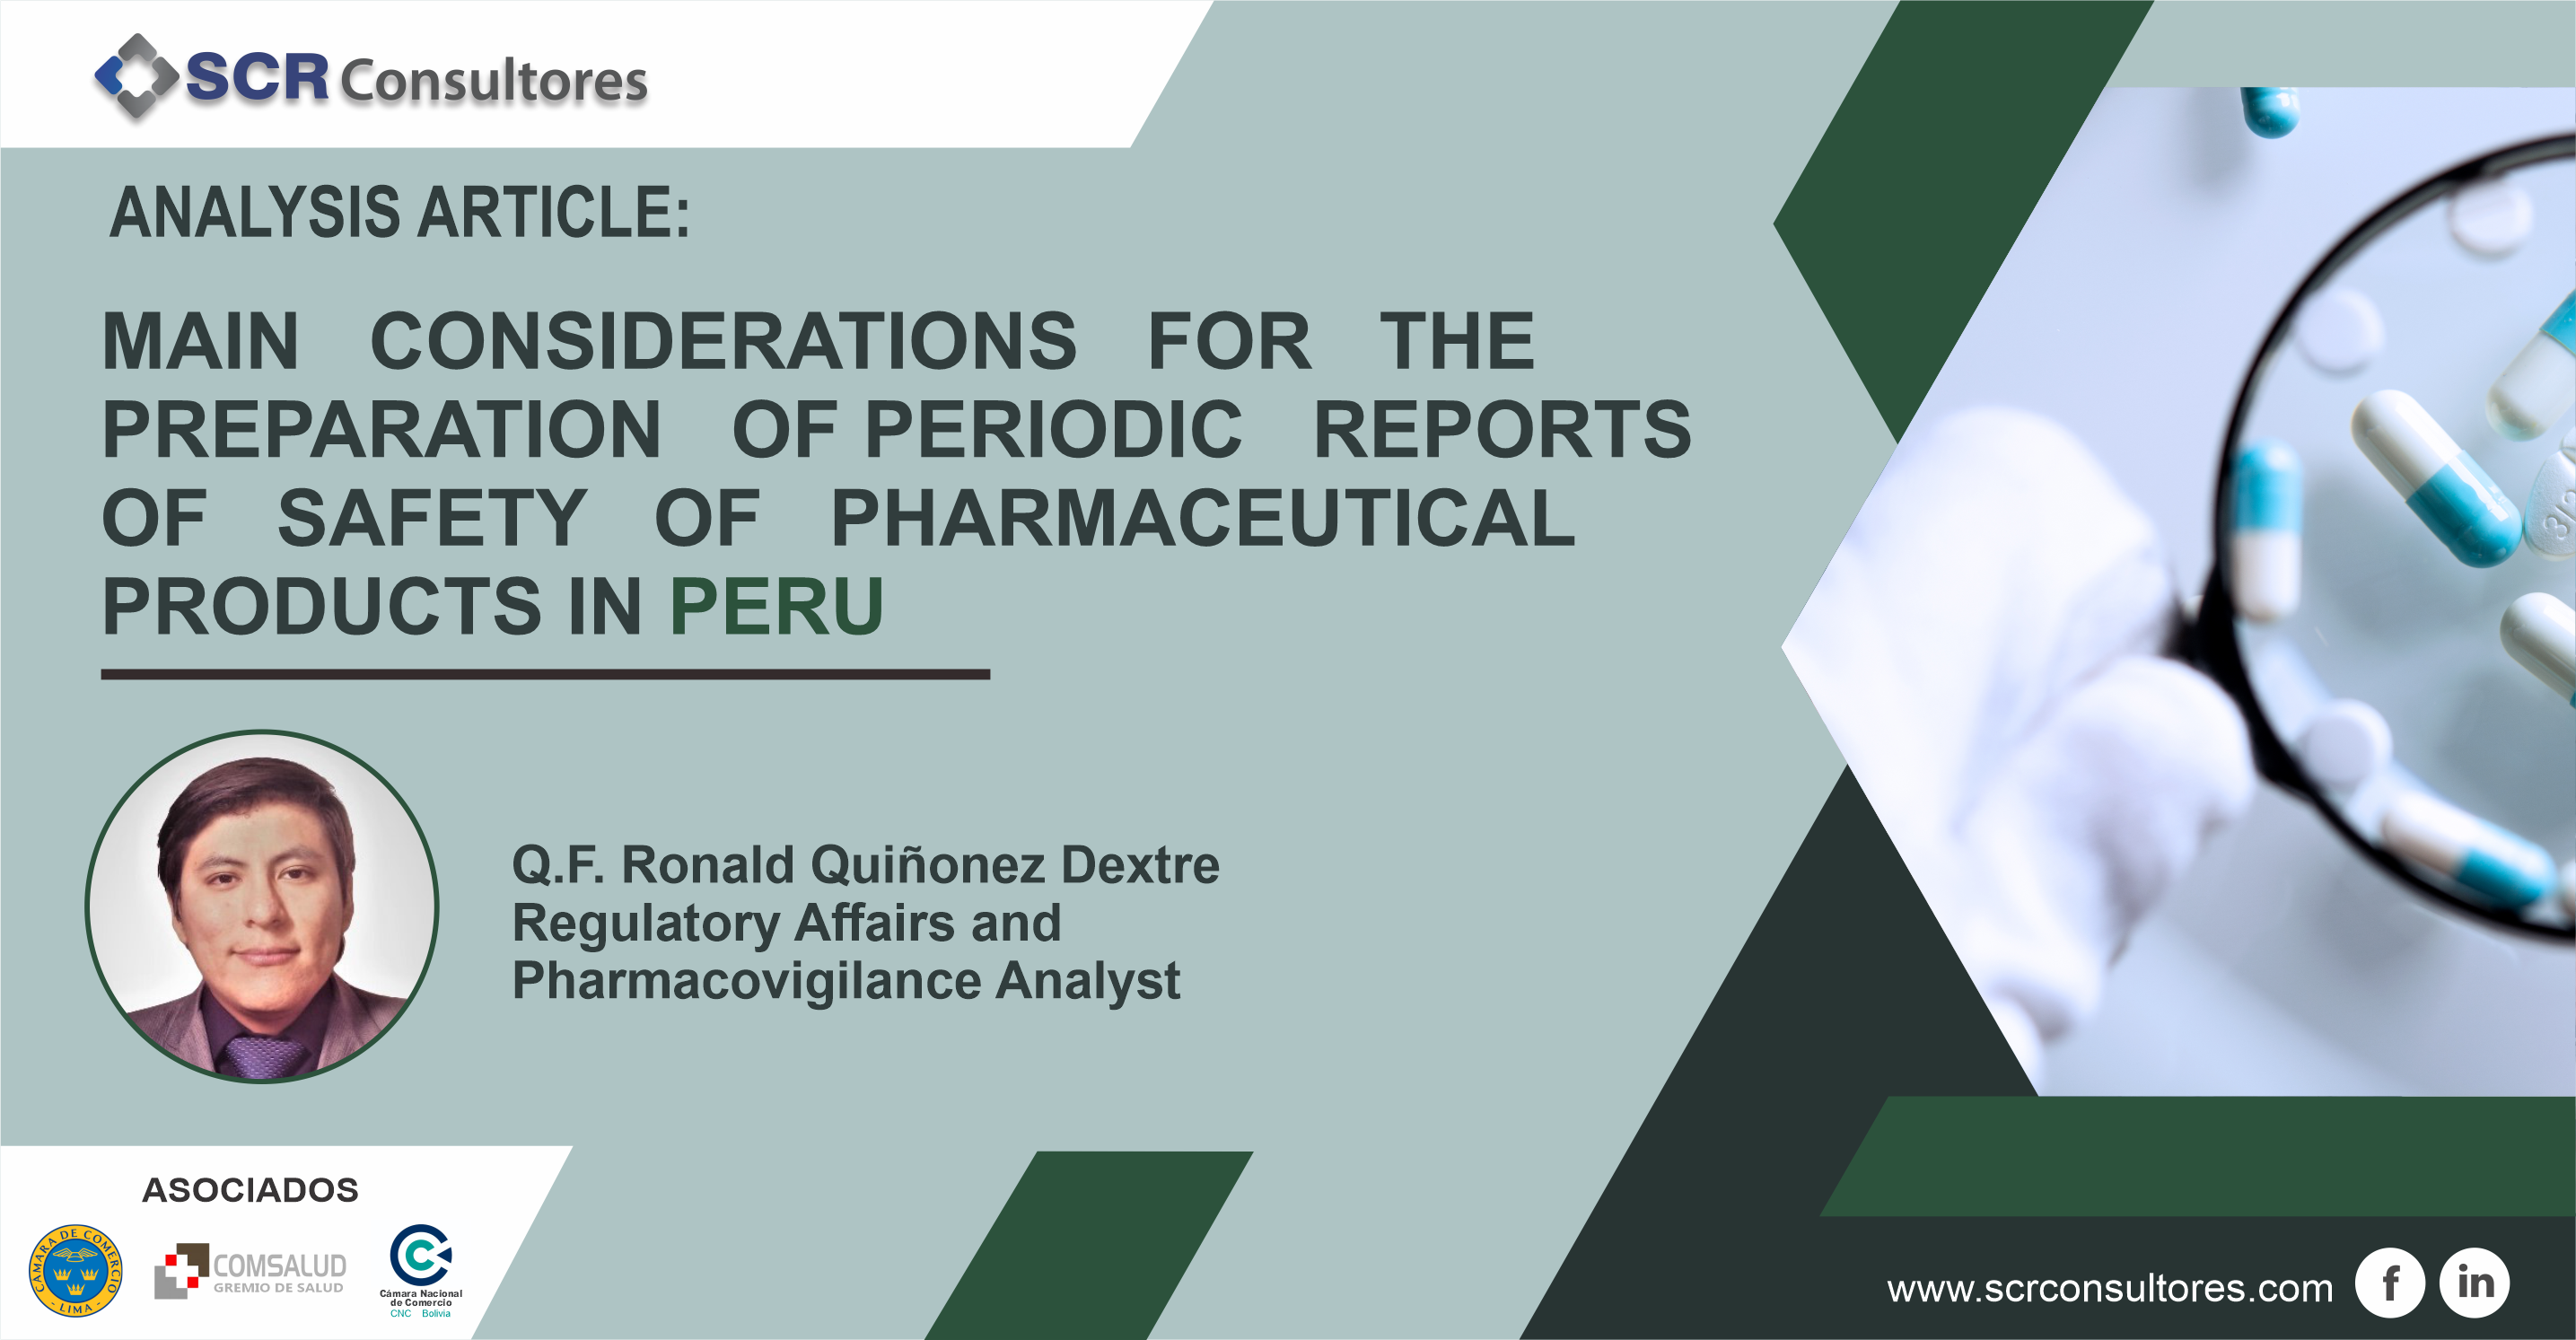 MAIN CONSIDERATIONS FOR THE PREPARATION OF PERIODIC REPORTS OF SAFETY OF PHARMACEUTICAL PRODUCTS IN PERU